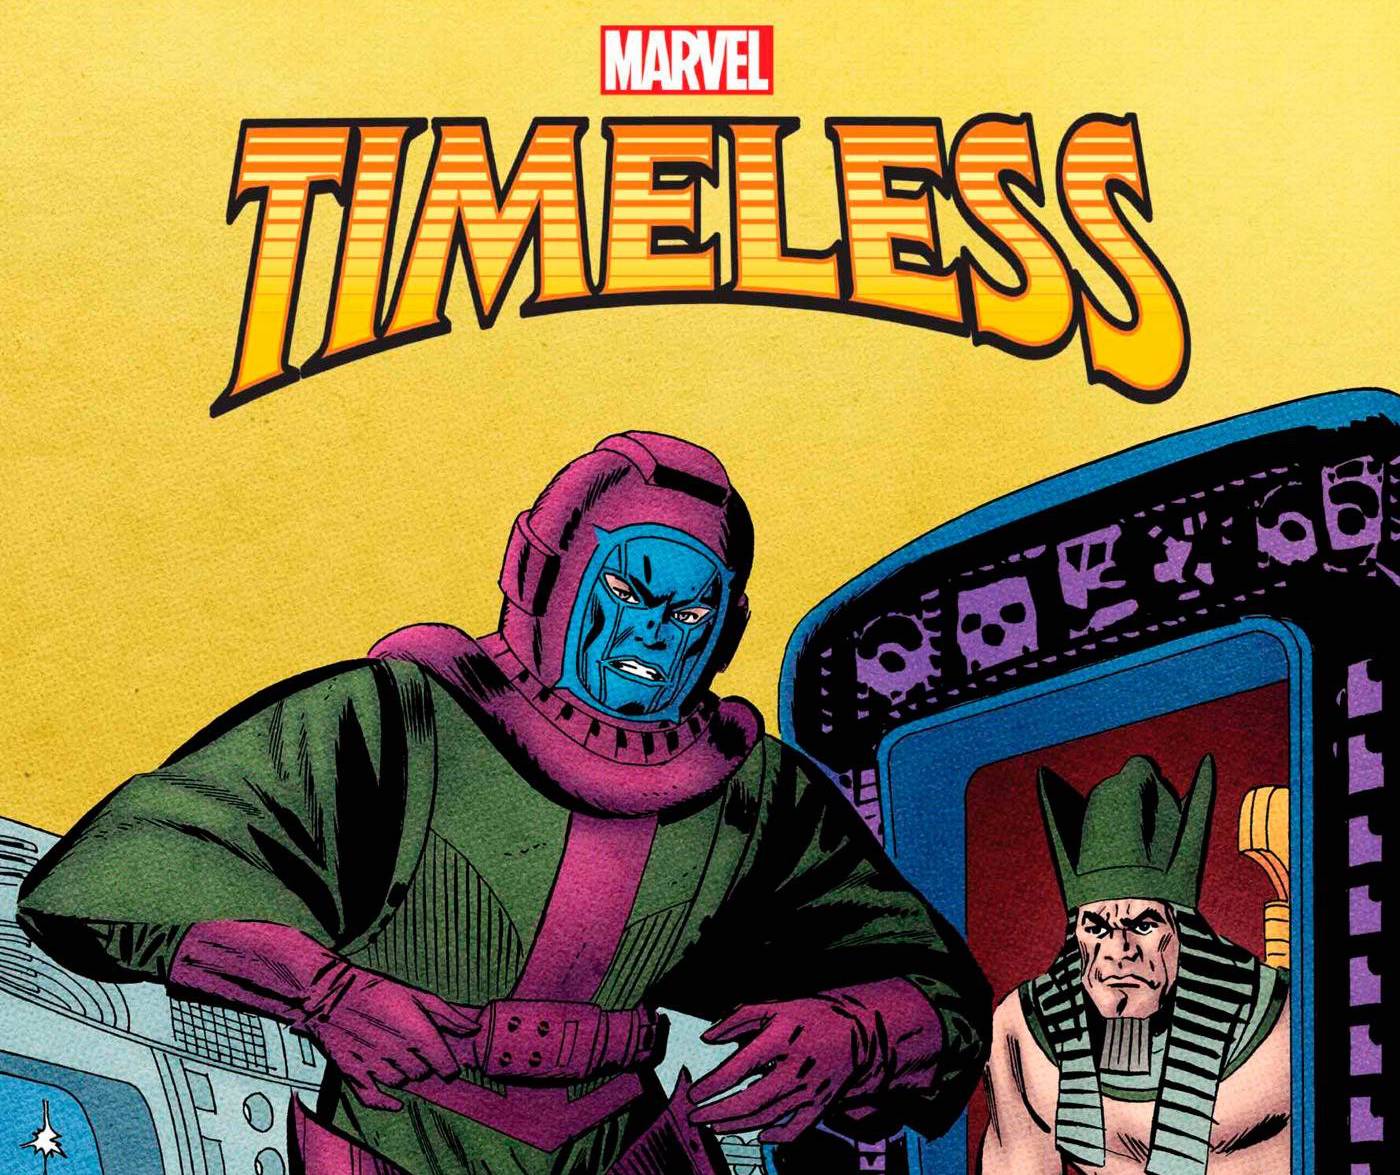 Deciphering the 'Timeless' #1 teases and Marvel's 2022 plans